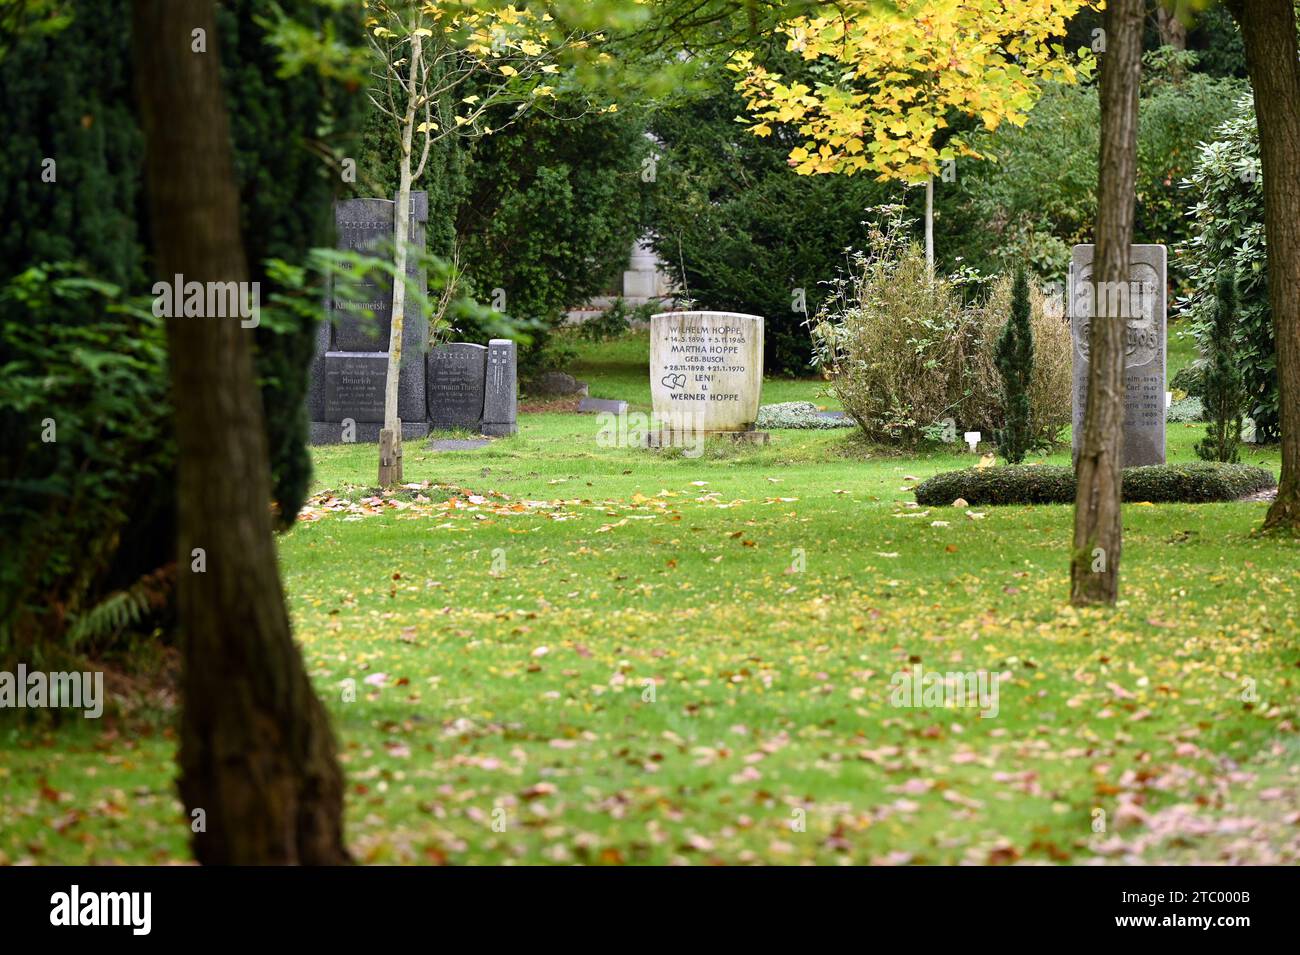 The Ohlsdorf Cemetery in Hamburg is the largest park cemetery in the world with an area of 389 hectares. Stock Photo